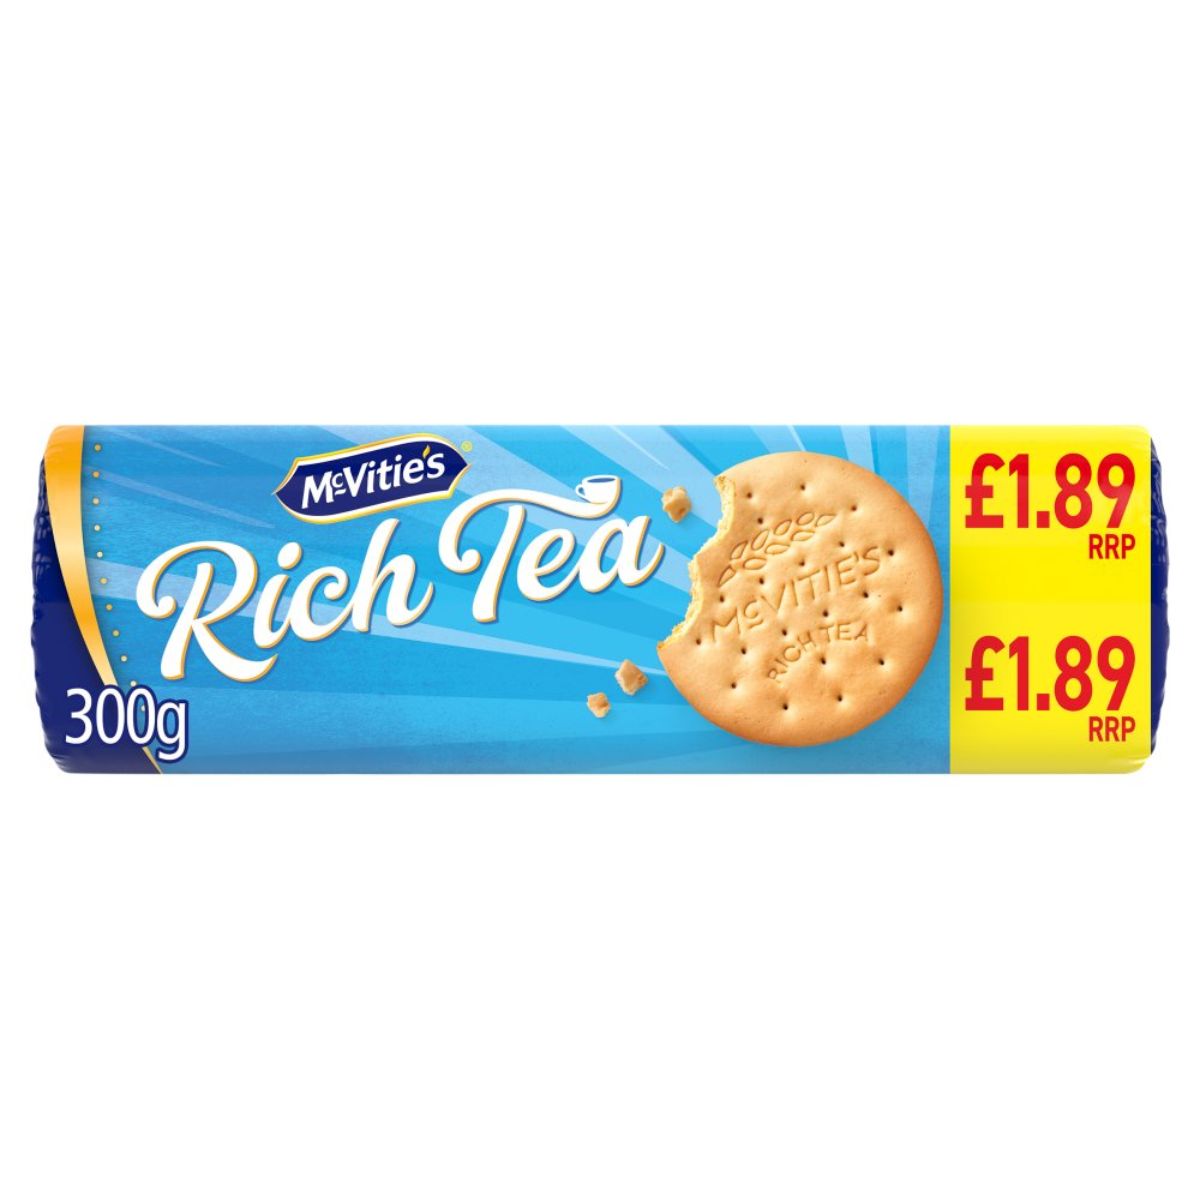 A McVities - Rich Tea Classic Biscuits - 300g on a white background.